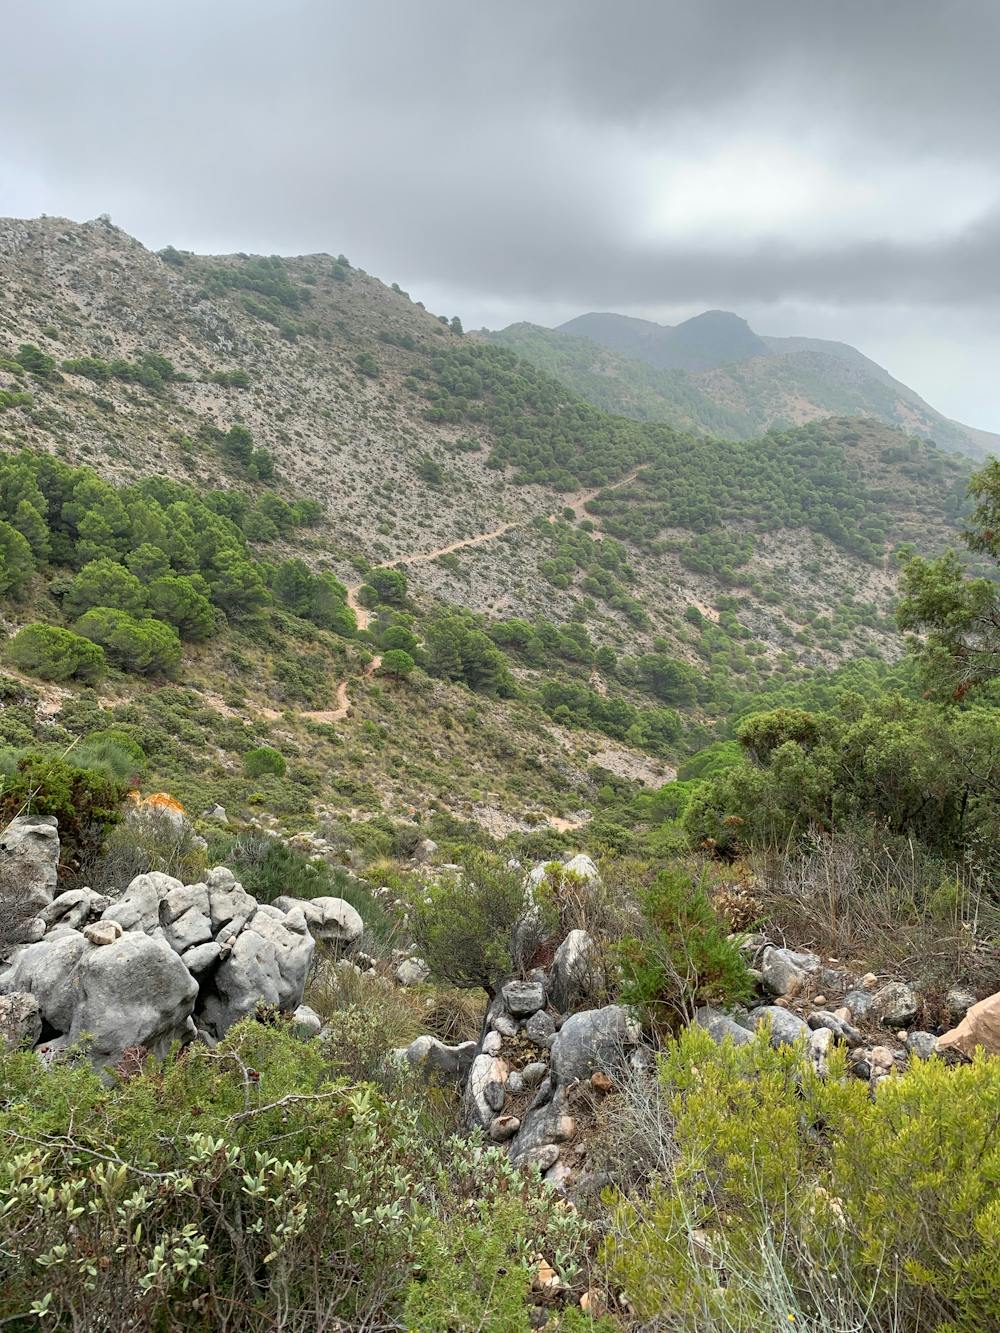 Photo from Peak to Peak and back again on the Costa del Sol